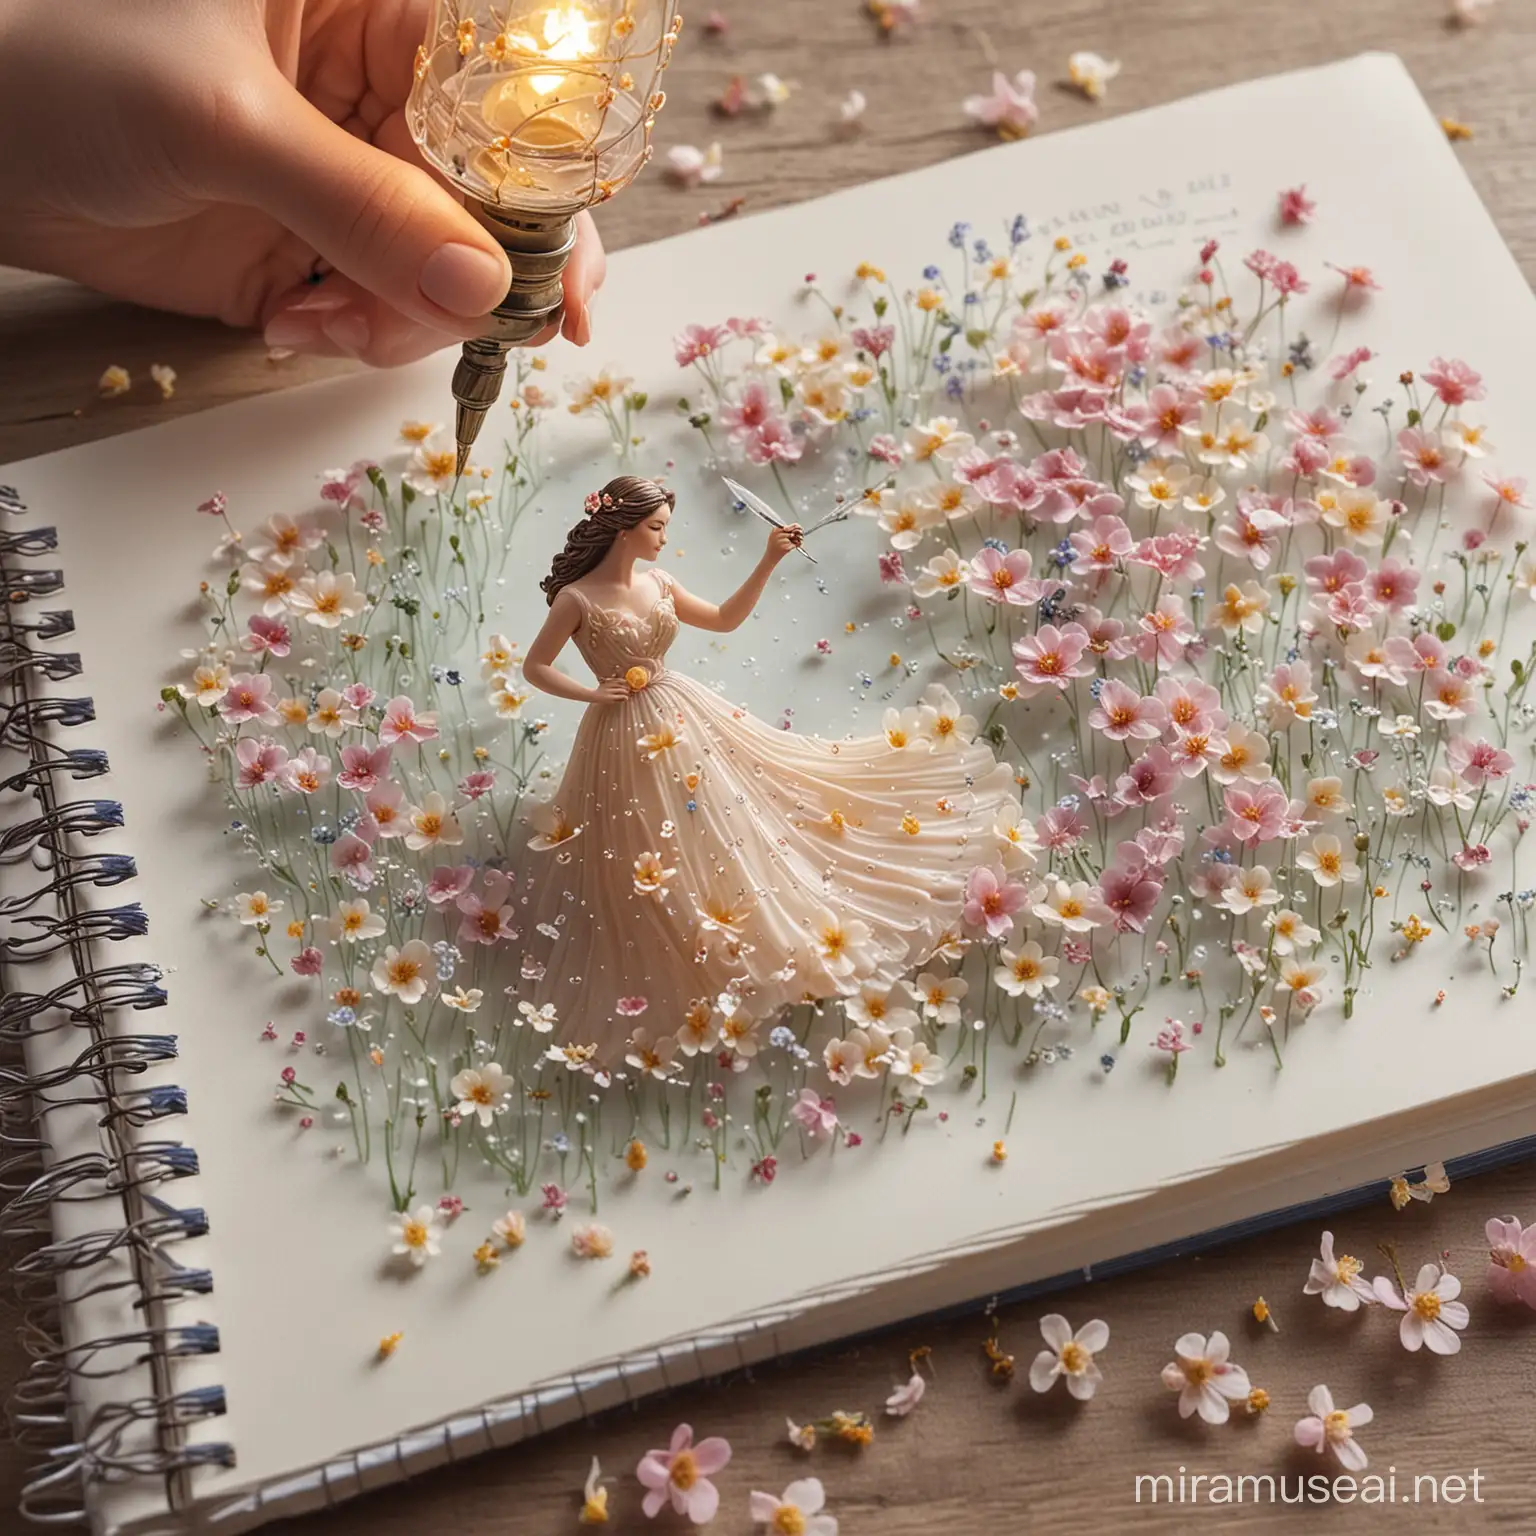 Floral Resin Pen Creates PhotoRealistic Woman in Flowing Dress